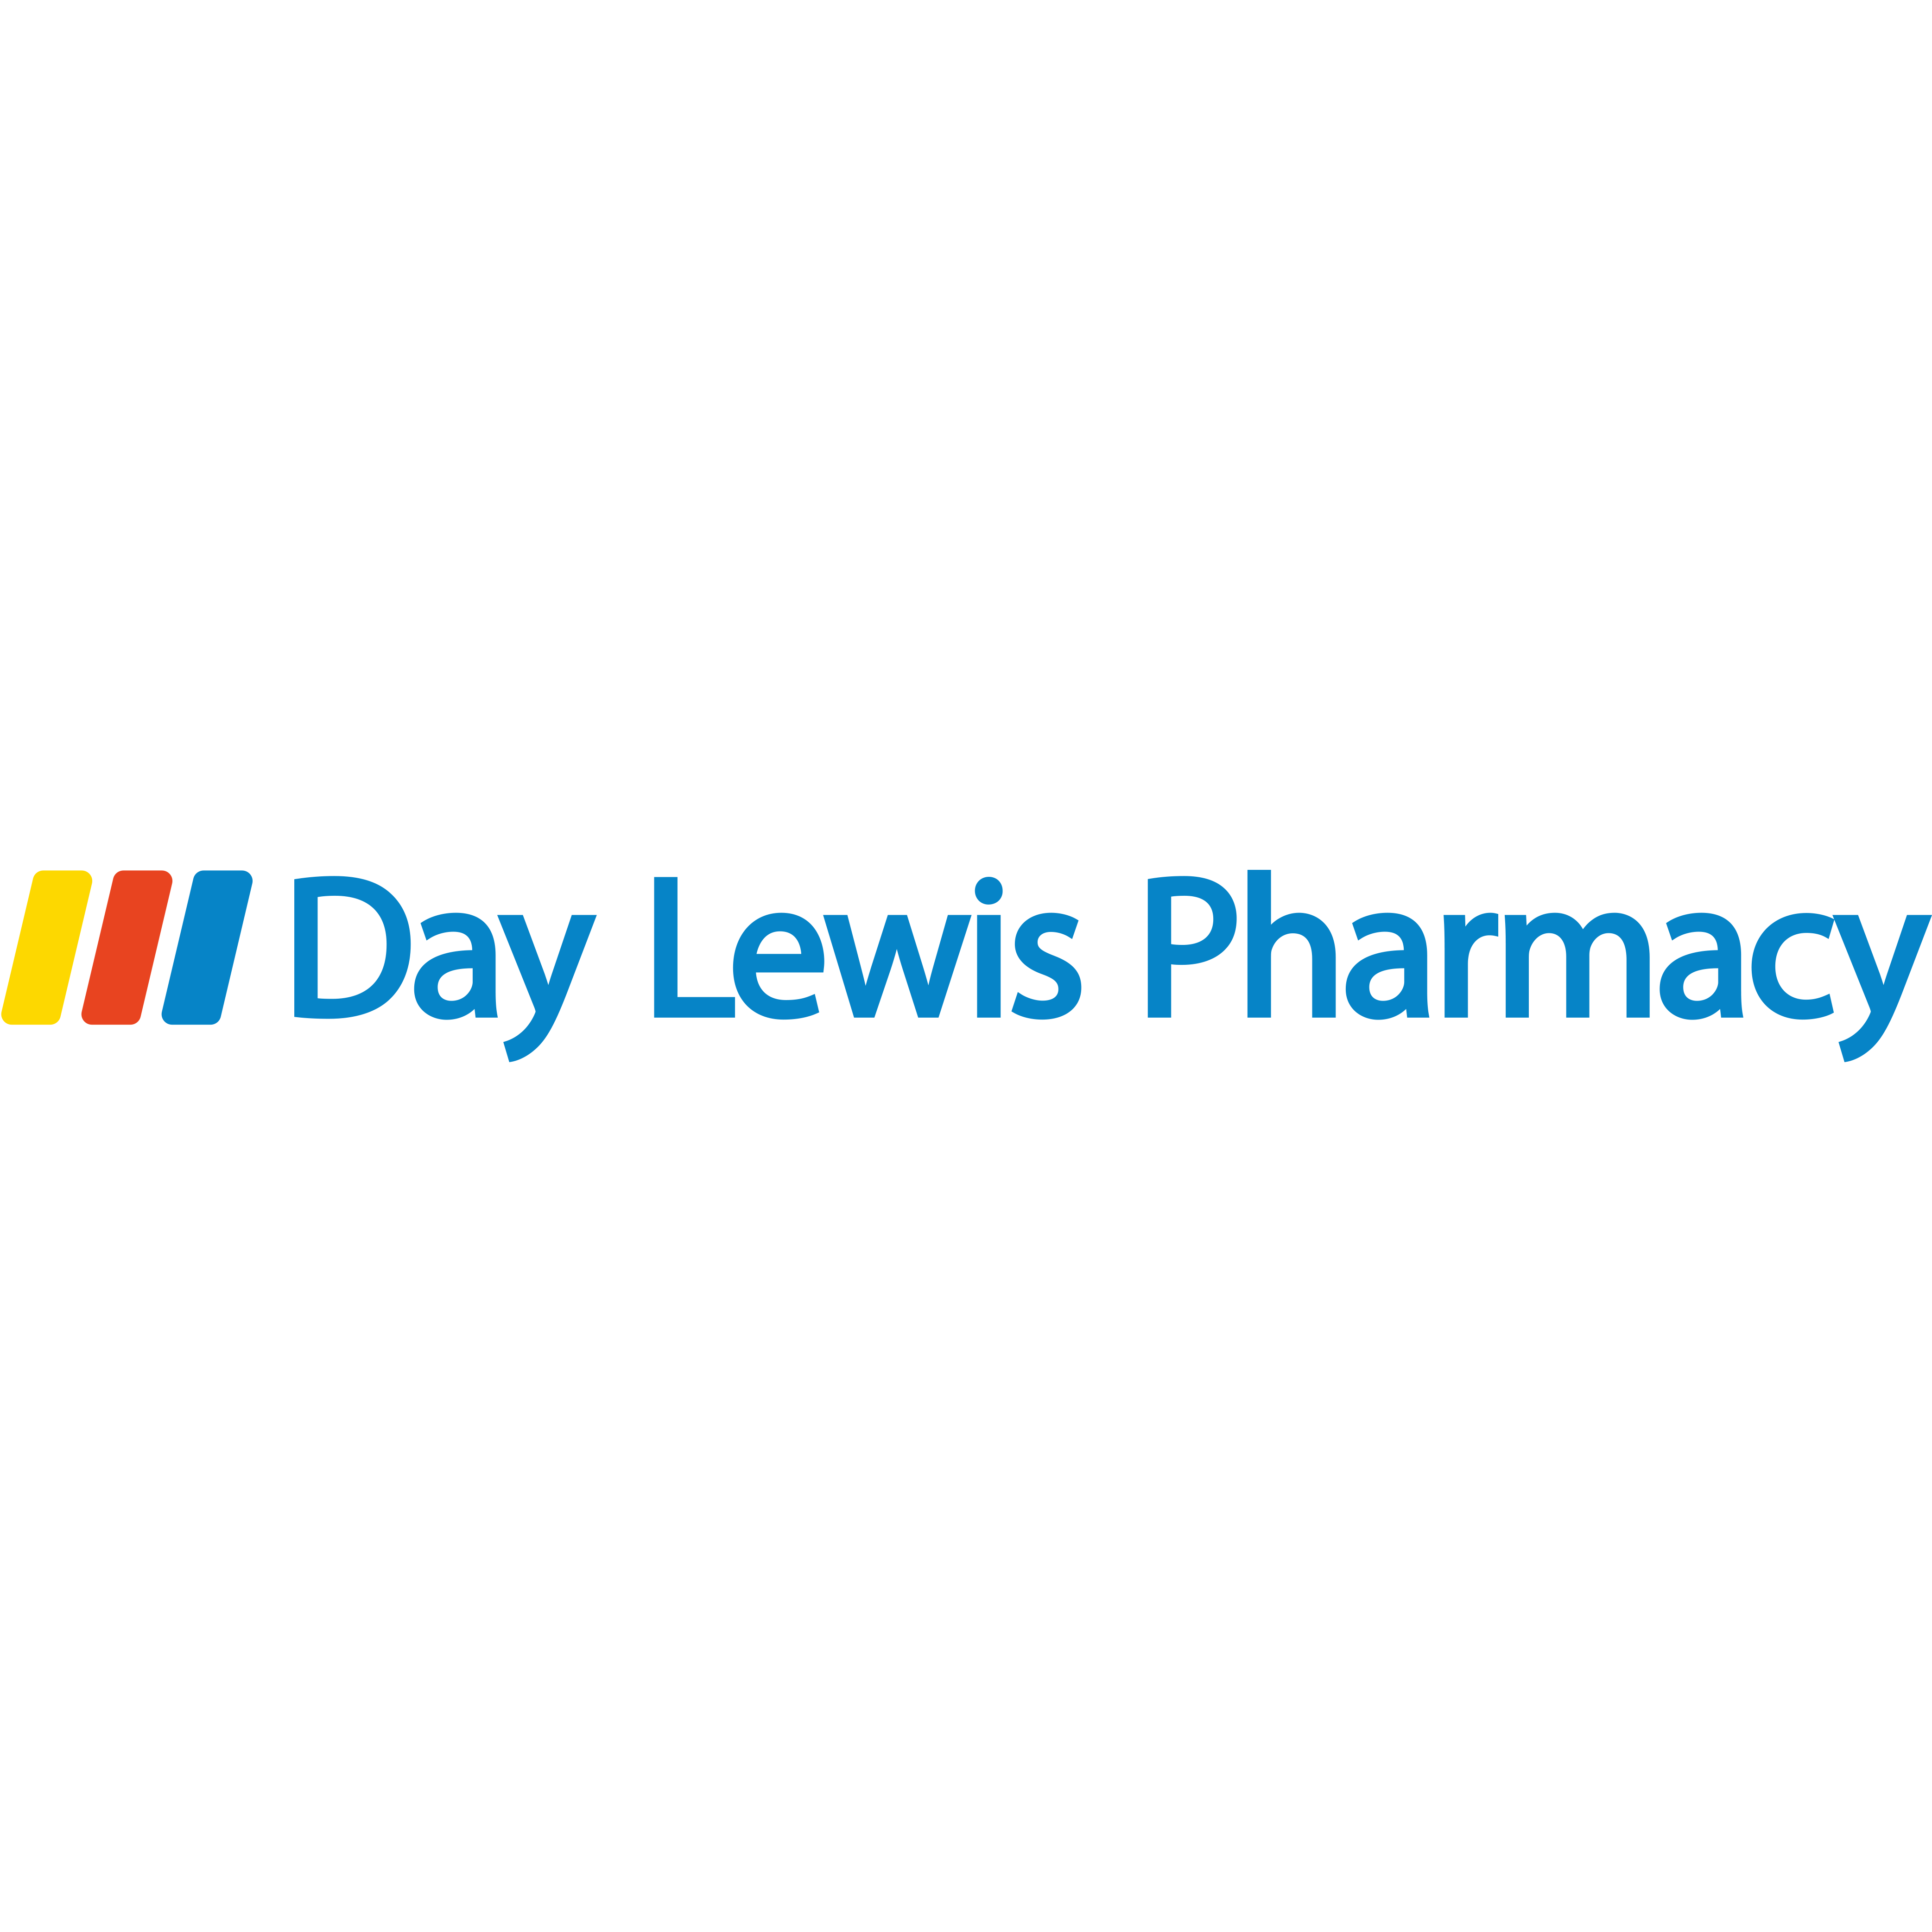 Day Lewis Pharmacy Lordswood - Southampton, Hampshire SO16 5LL - 02380 780115 | ShowMeLocal.com